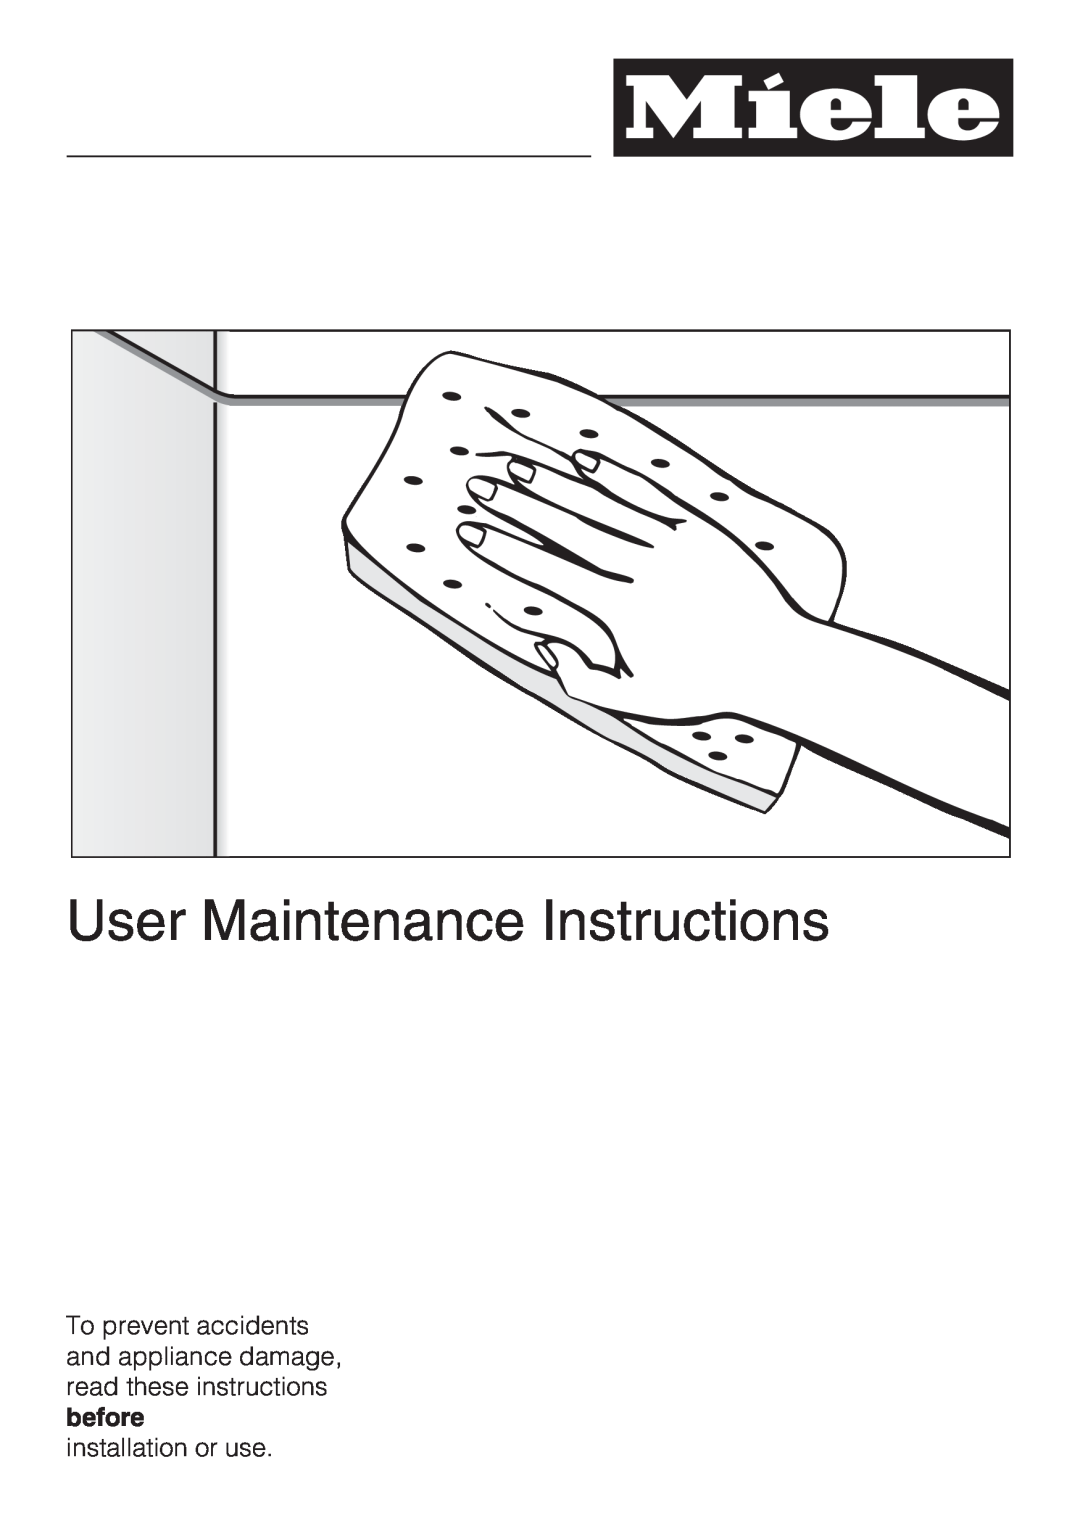 Miele G 5575, G 5570 operating instructions User Maintenance Instructions, installation or use 